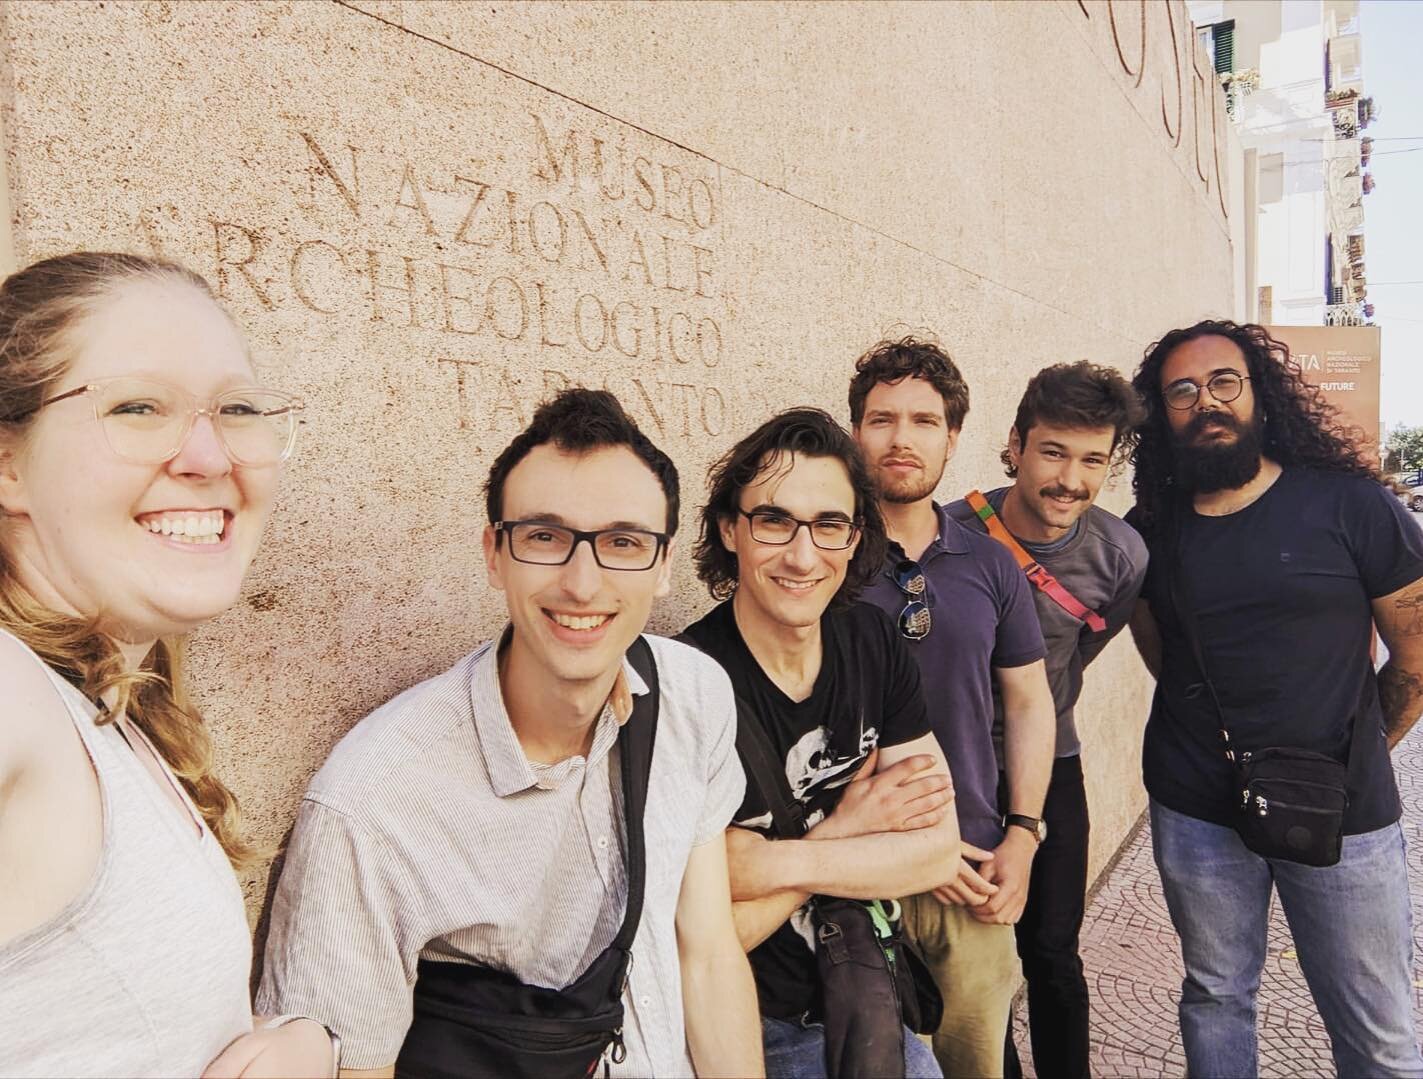 This intrepid and talent group of @mcmasteru, @smuhalifax and @universitadelsannio scholars visited @museoarcheologiconazionaleta, crossing over from #basilicata into #puglia. All part of their fieldwork and graduate research. #roguearchaeologists #a